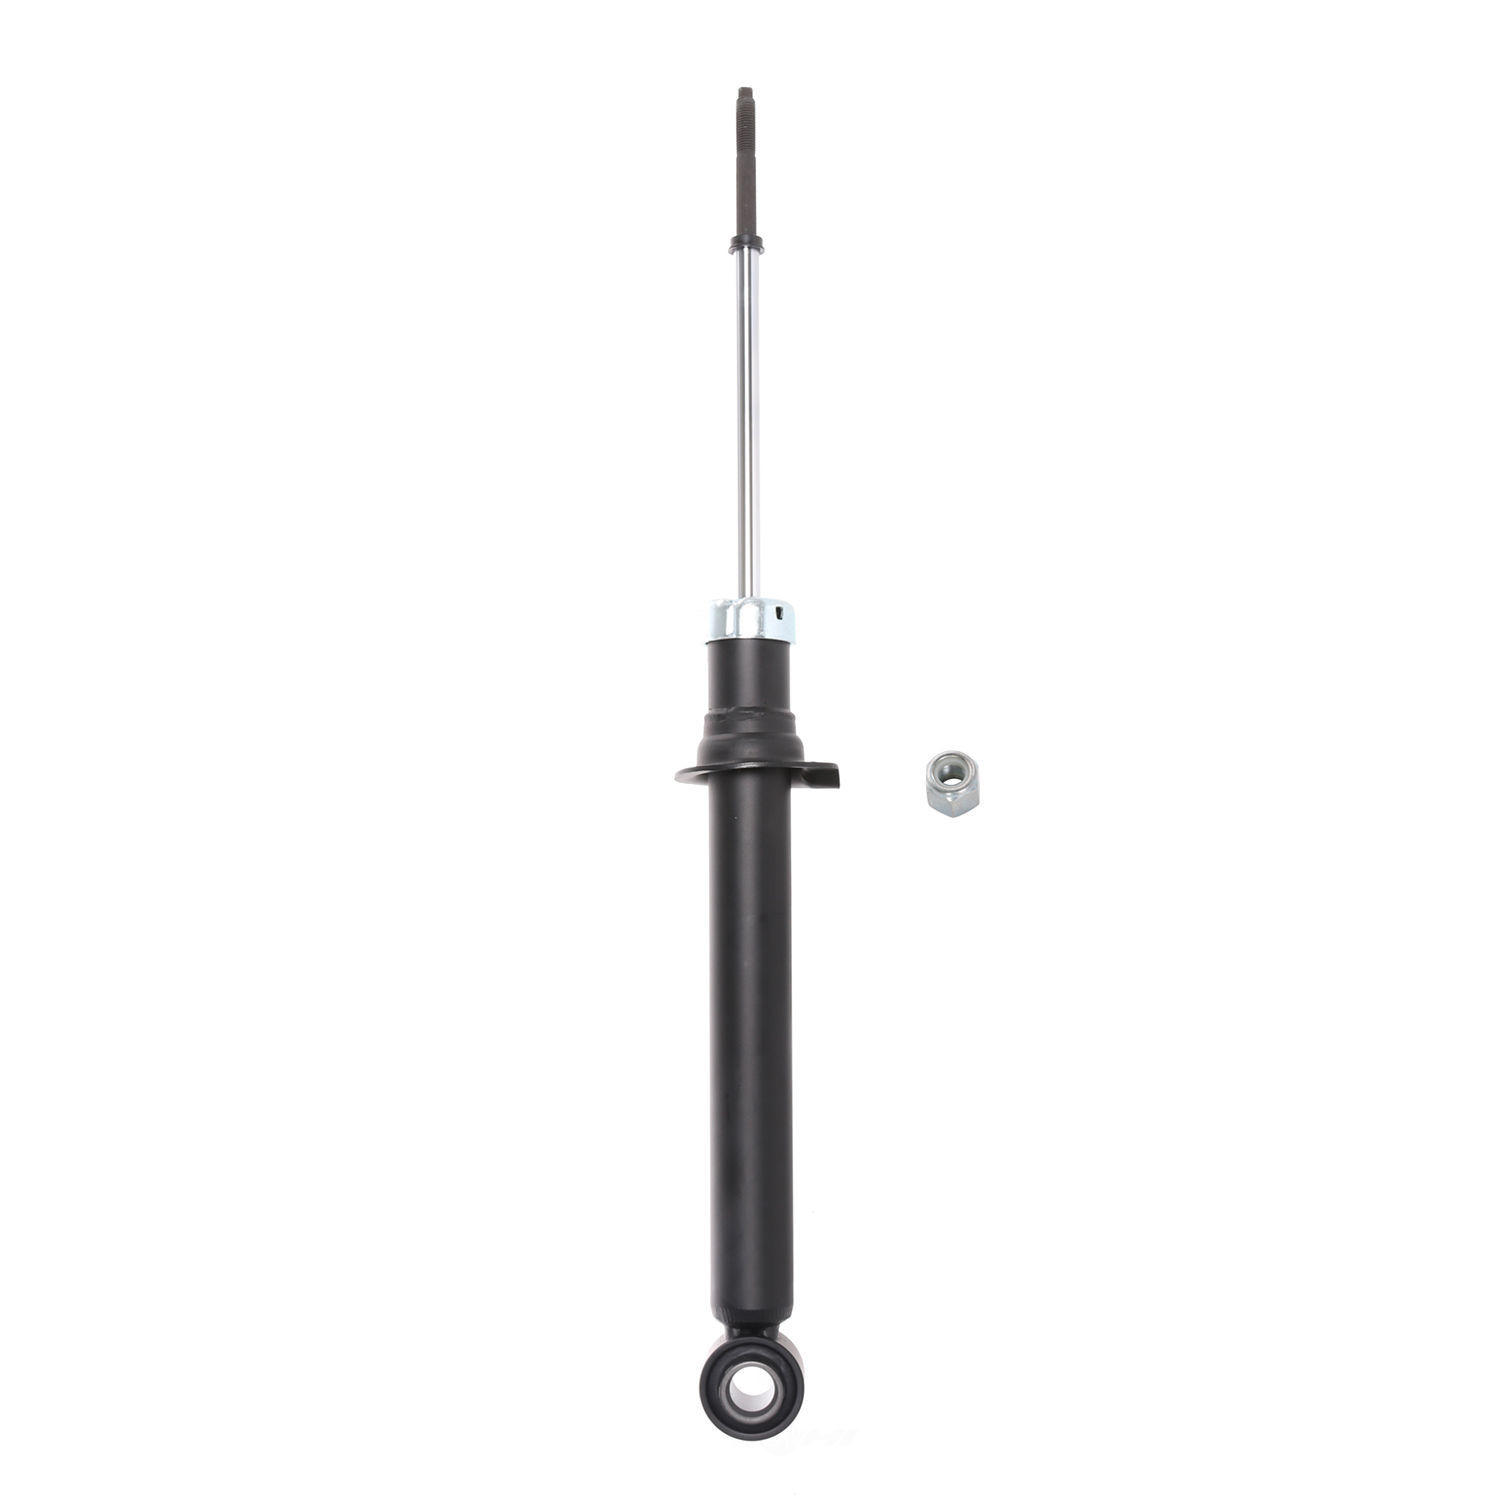 PERFORMANCE RIDE TECHNOLOGY BY ADD - Suspension Strut Assembly - P6T 372157